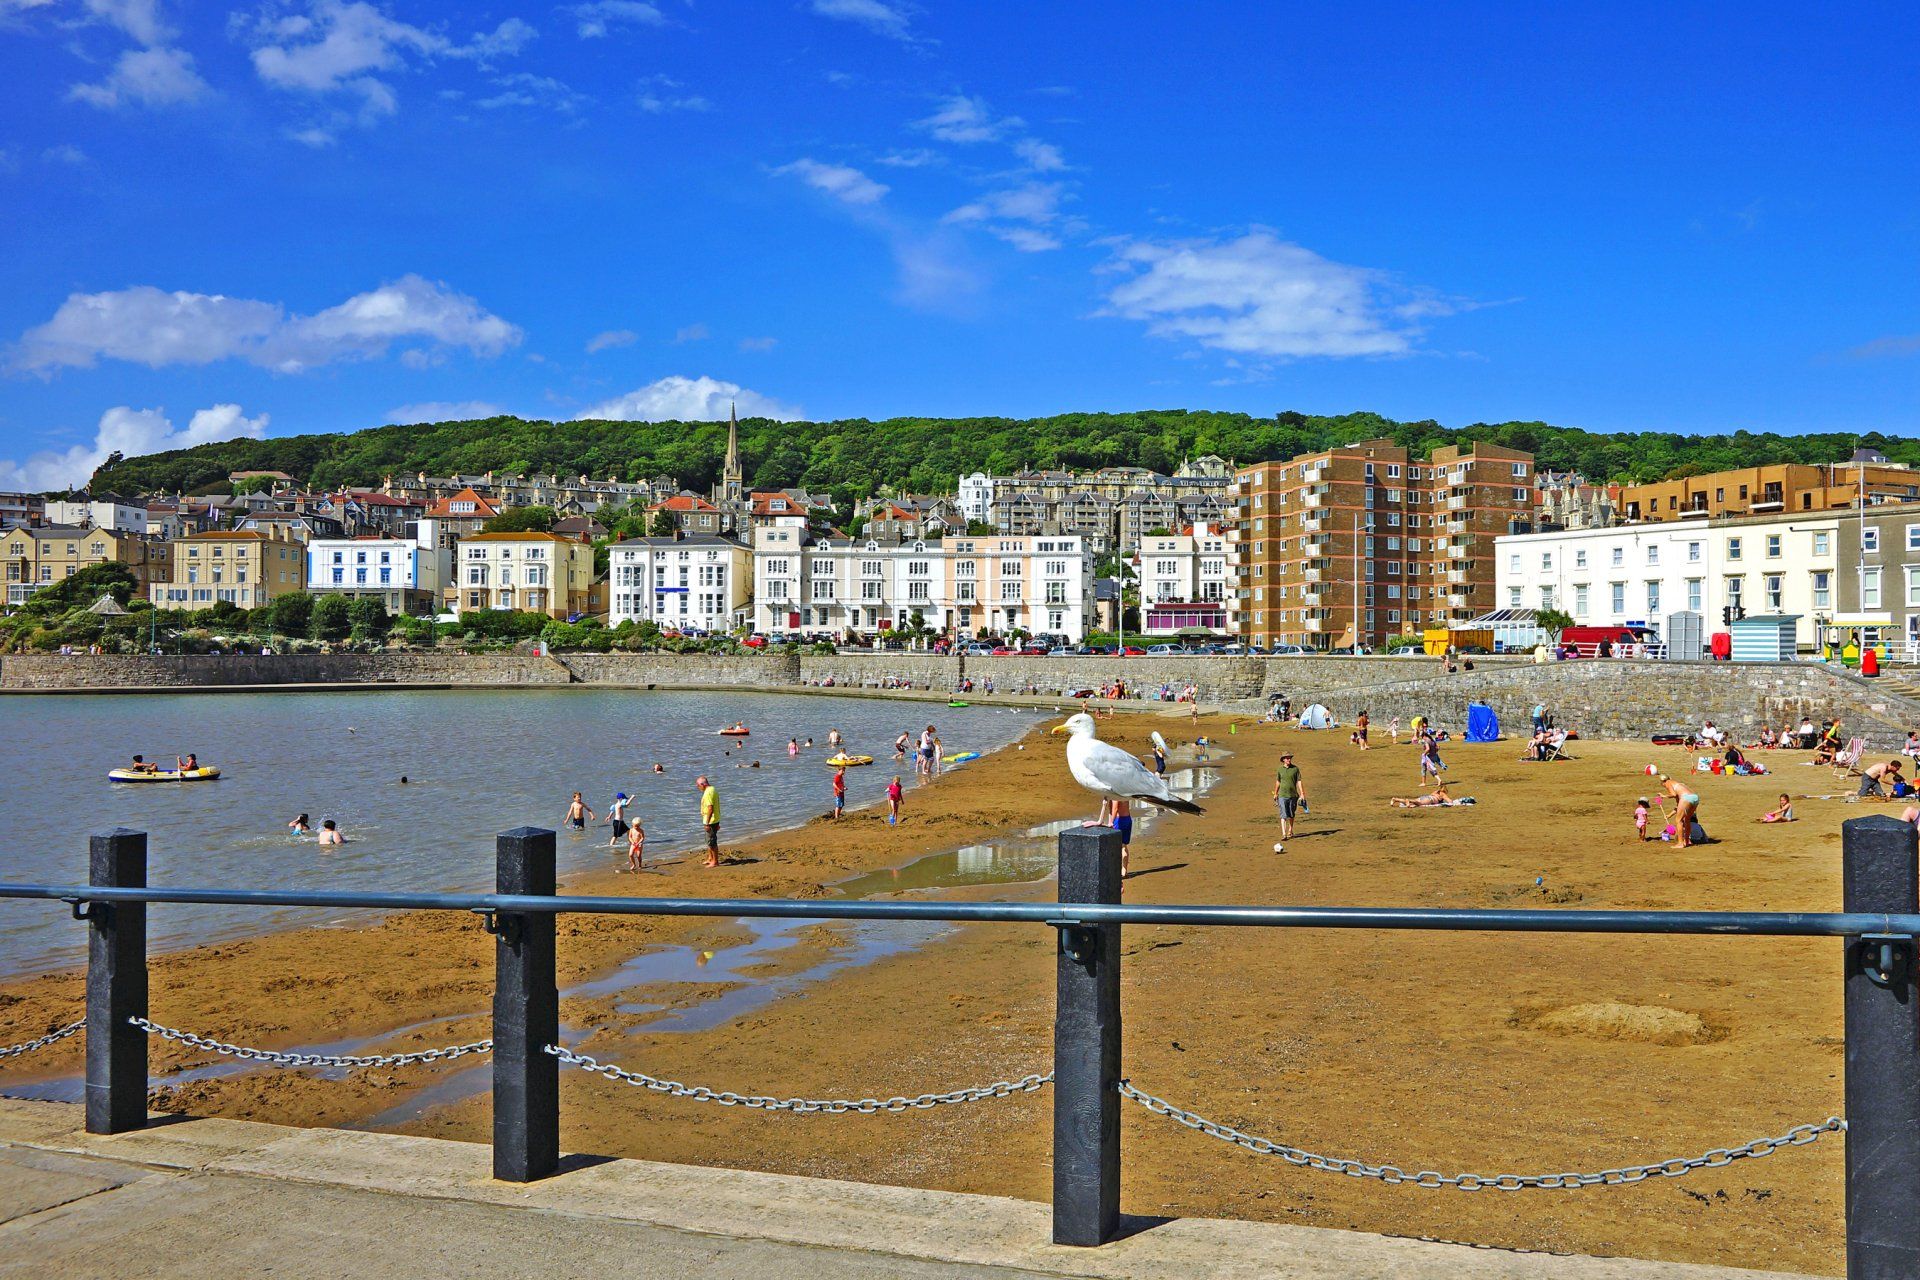 Marine Lake in Weston-super-Mare near our holiday park where you can buy static caravans.